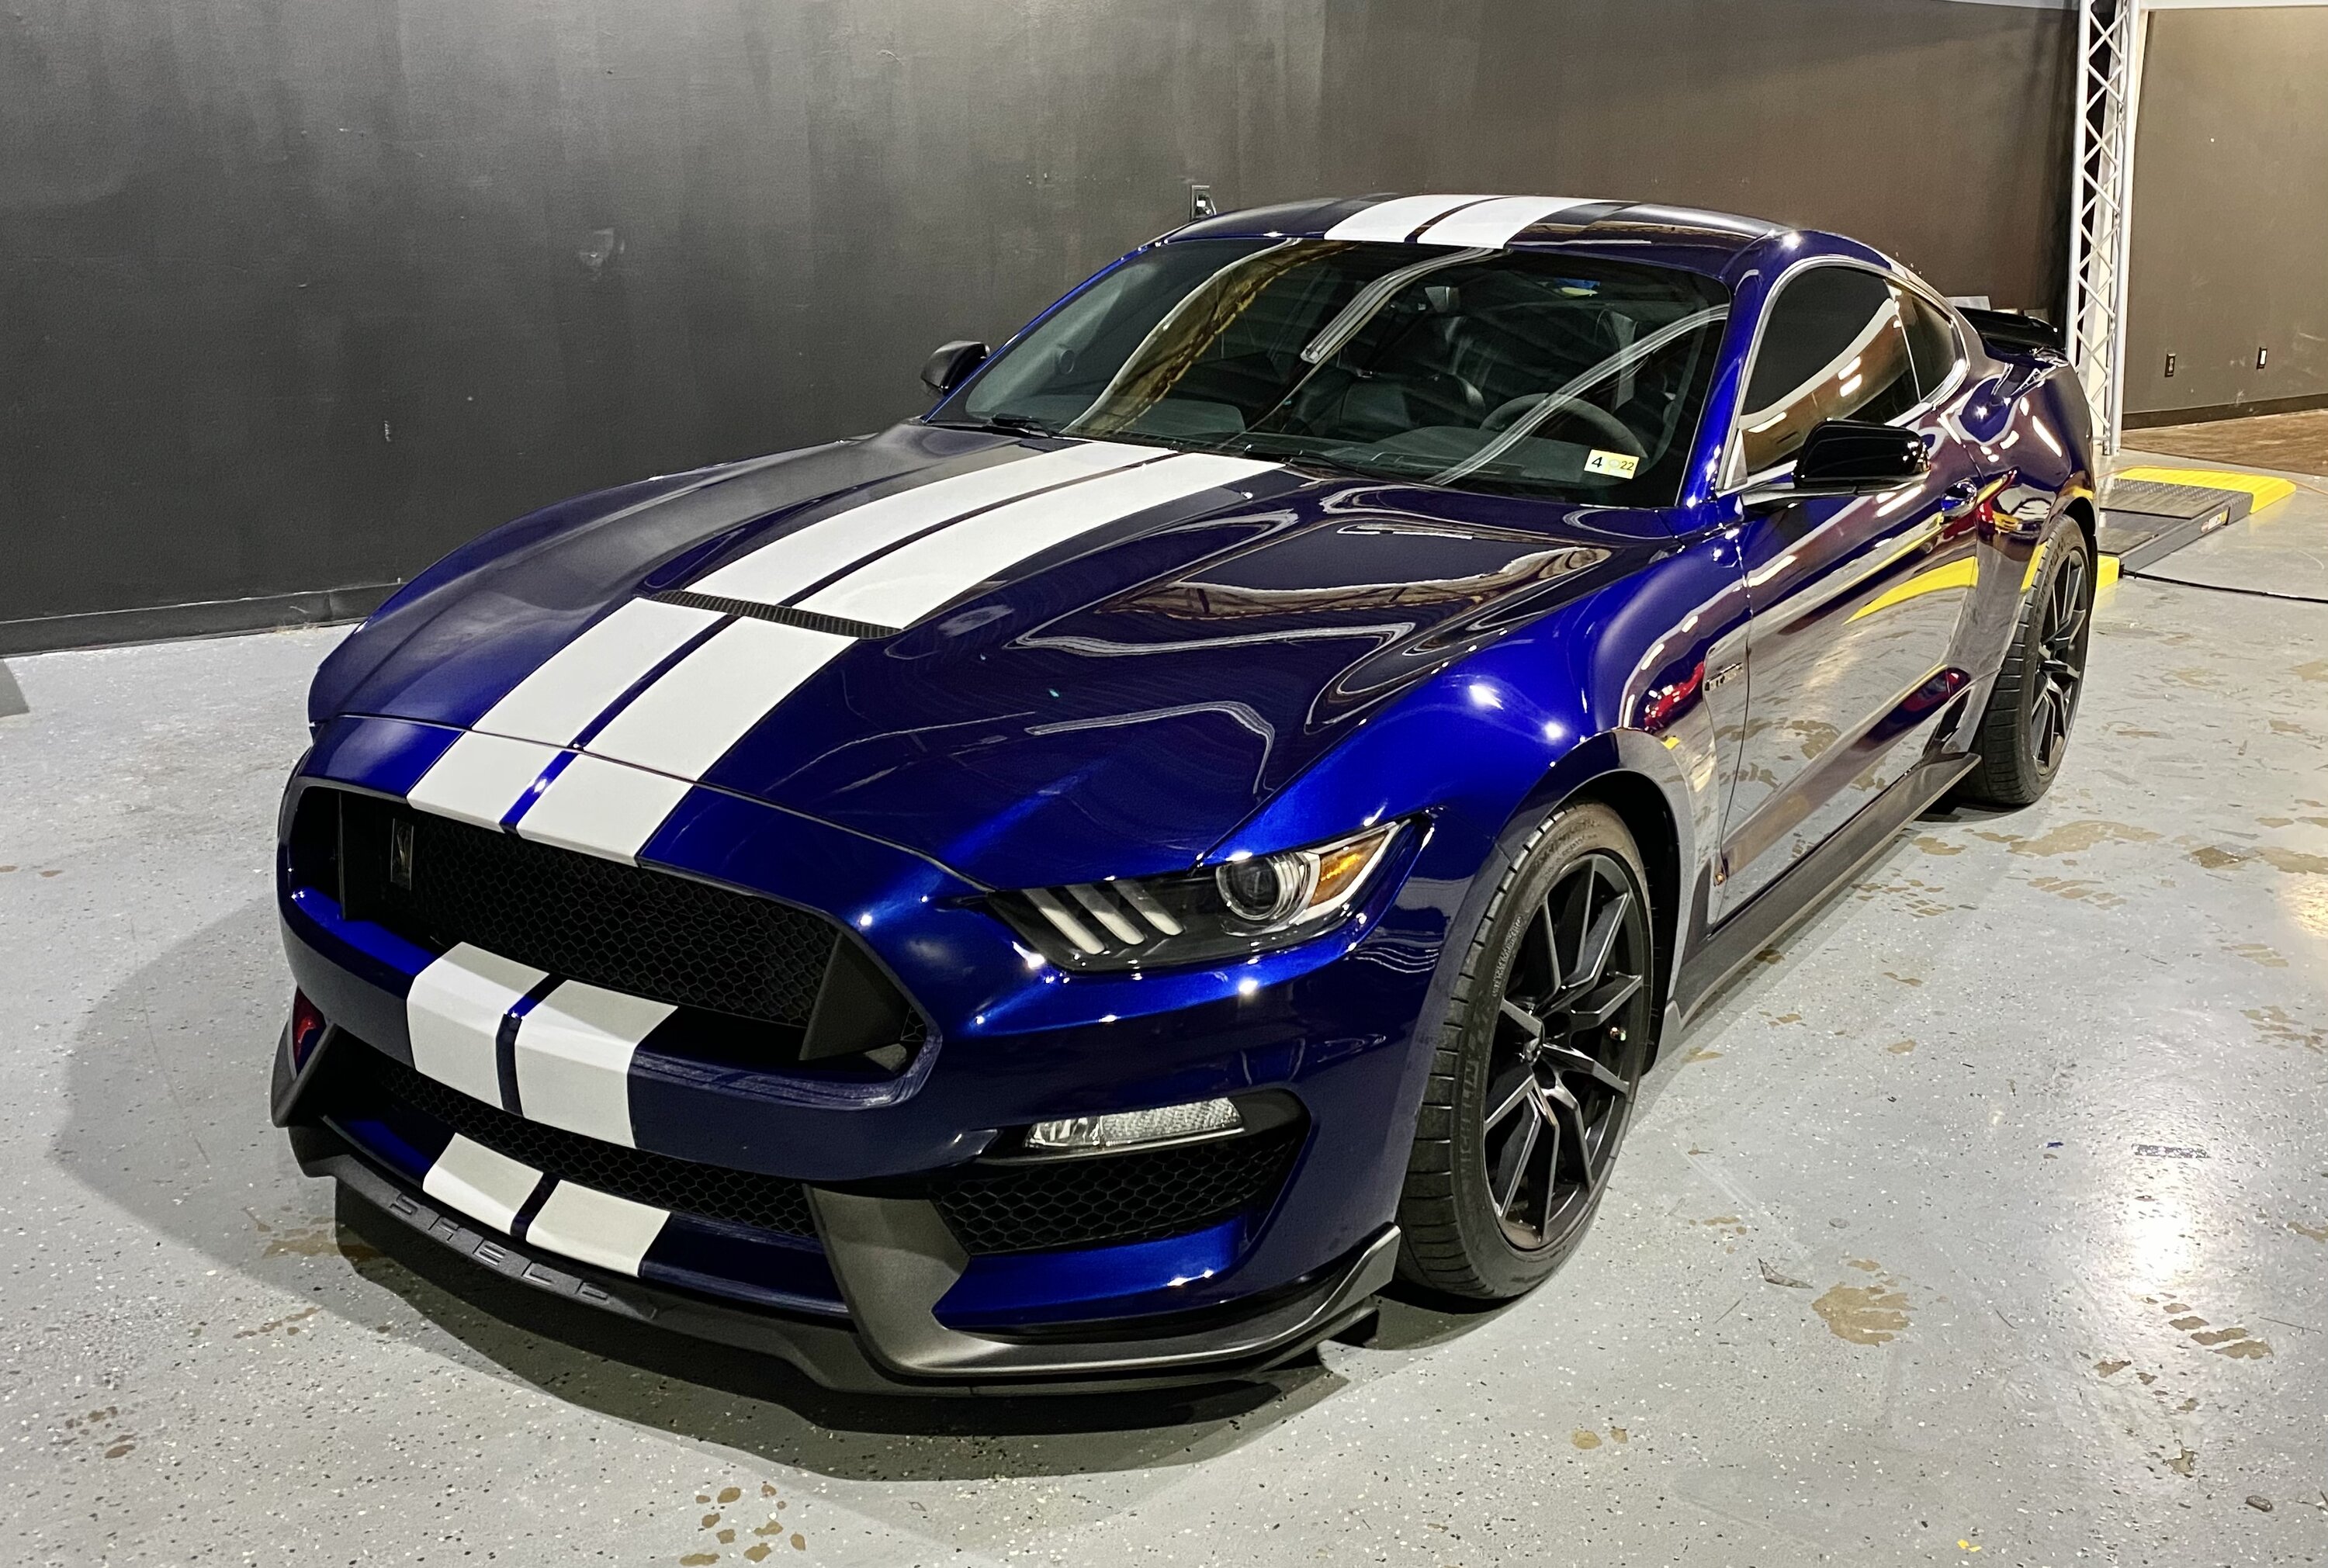 KONA BLUE S550 MUSTANG Thread | Page 22 | 2015+ S550 Mustang Forum (GT ...